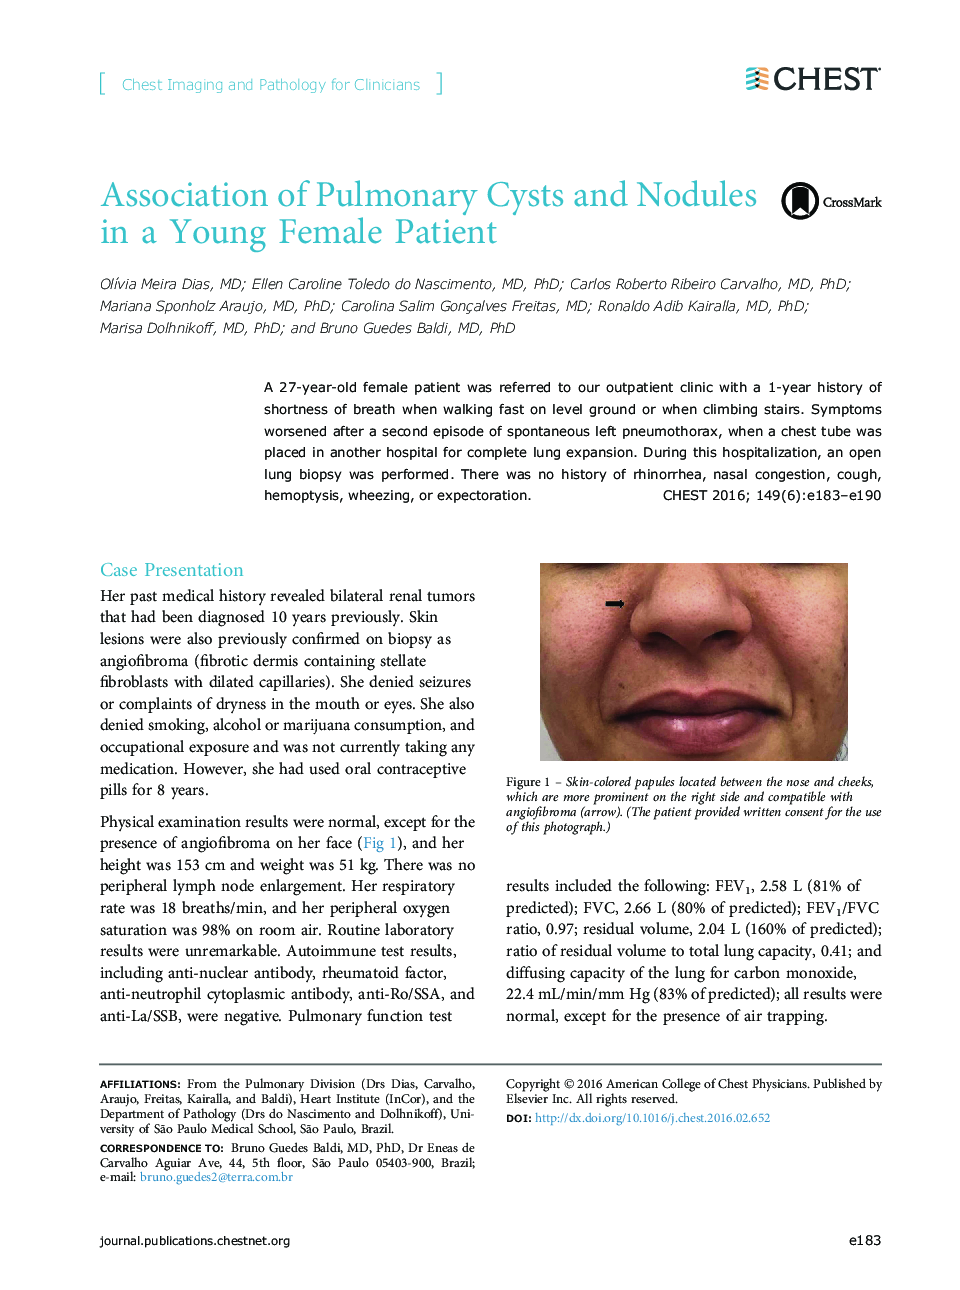 Association of Pulmonary Cysts and Nodules in a Young Female Patient